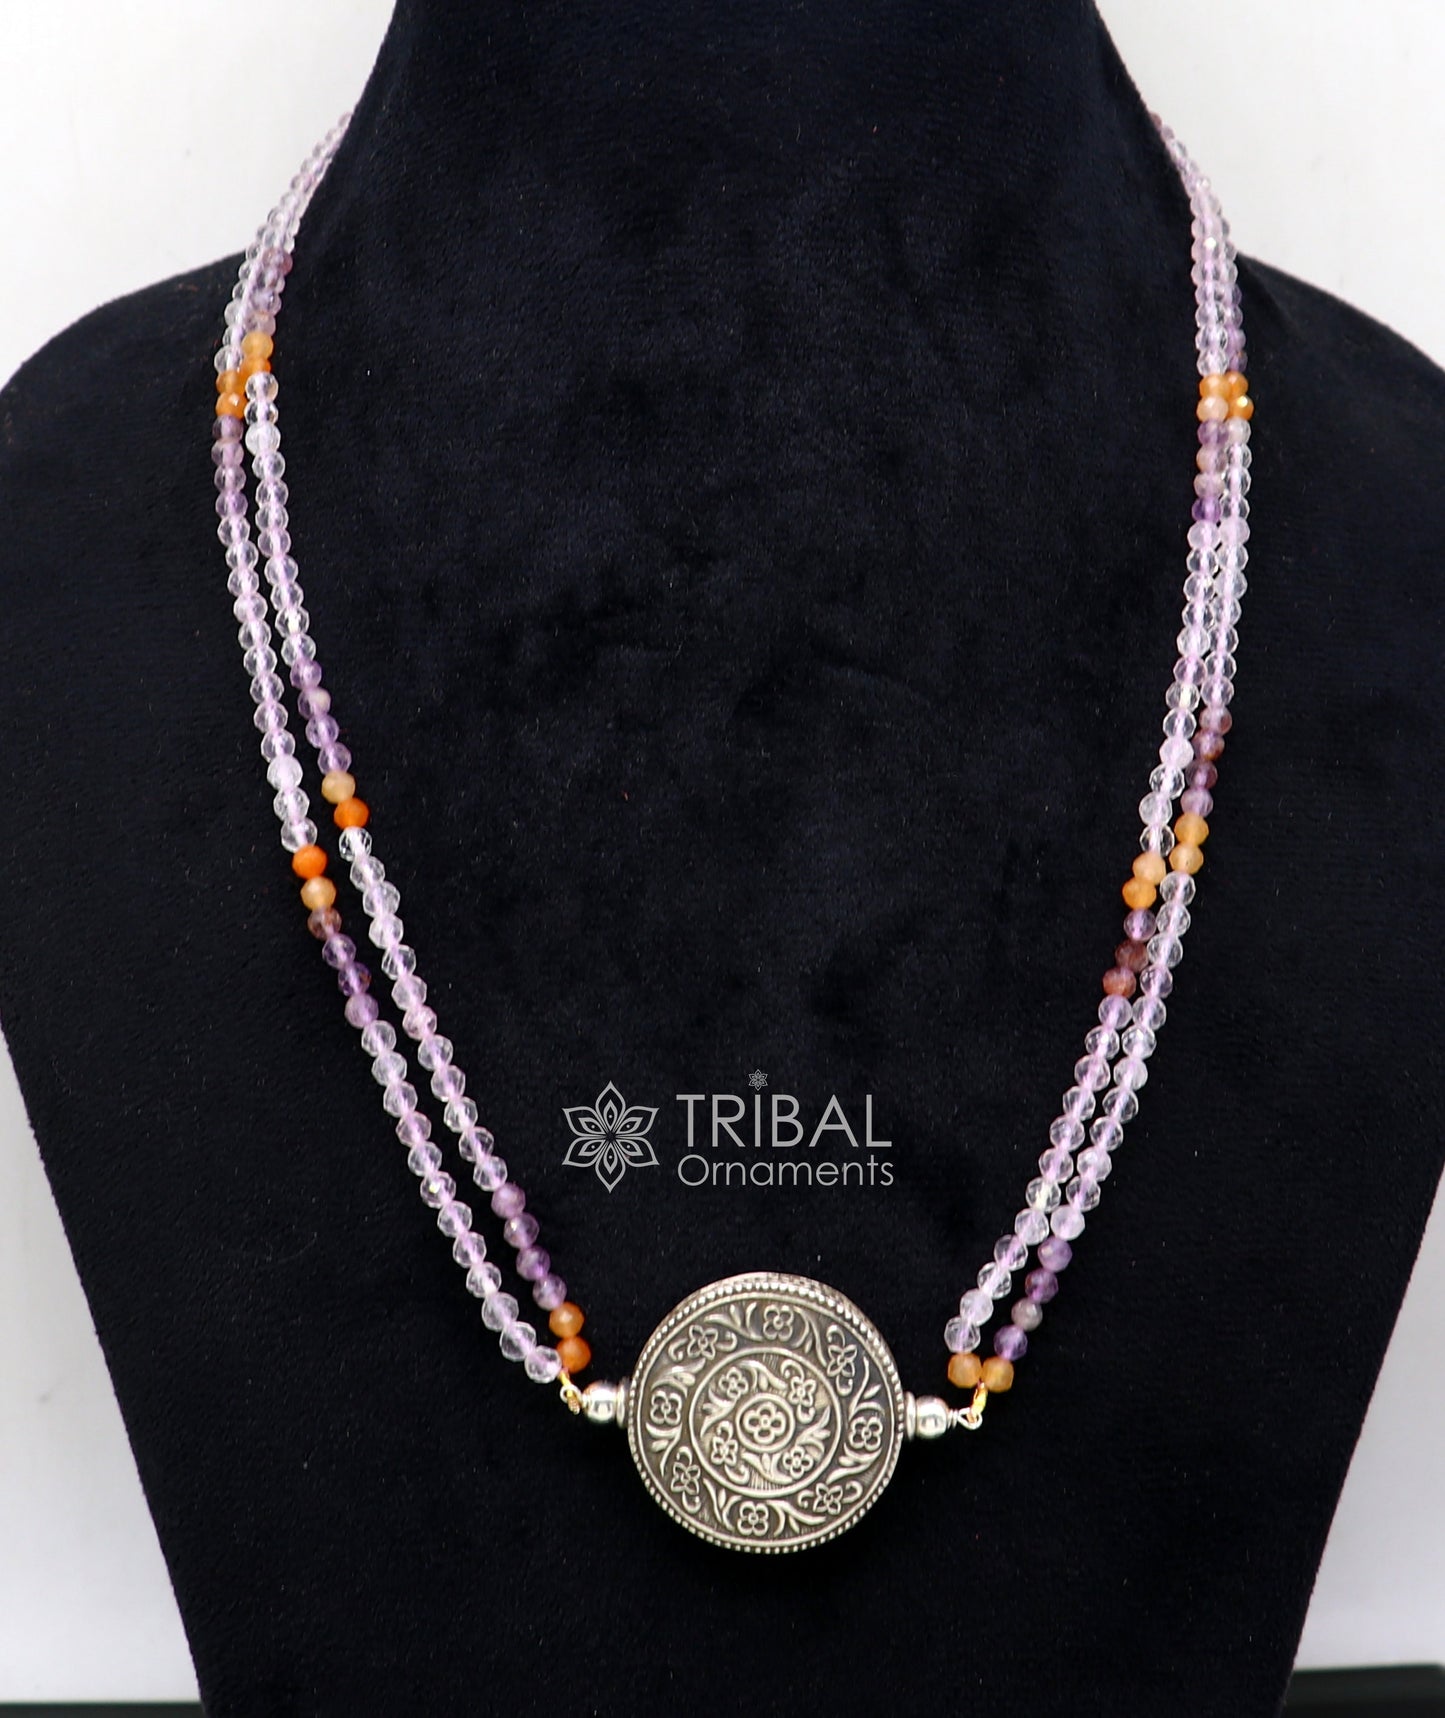 Indian traditional cultural style trendy natural multicolor stone beaded 925 sterling silver necklace, choker tribal ethnic jewelry set611 - TRIBAL ORNAMENTS